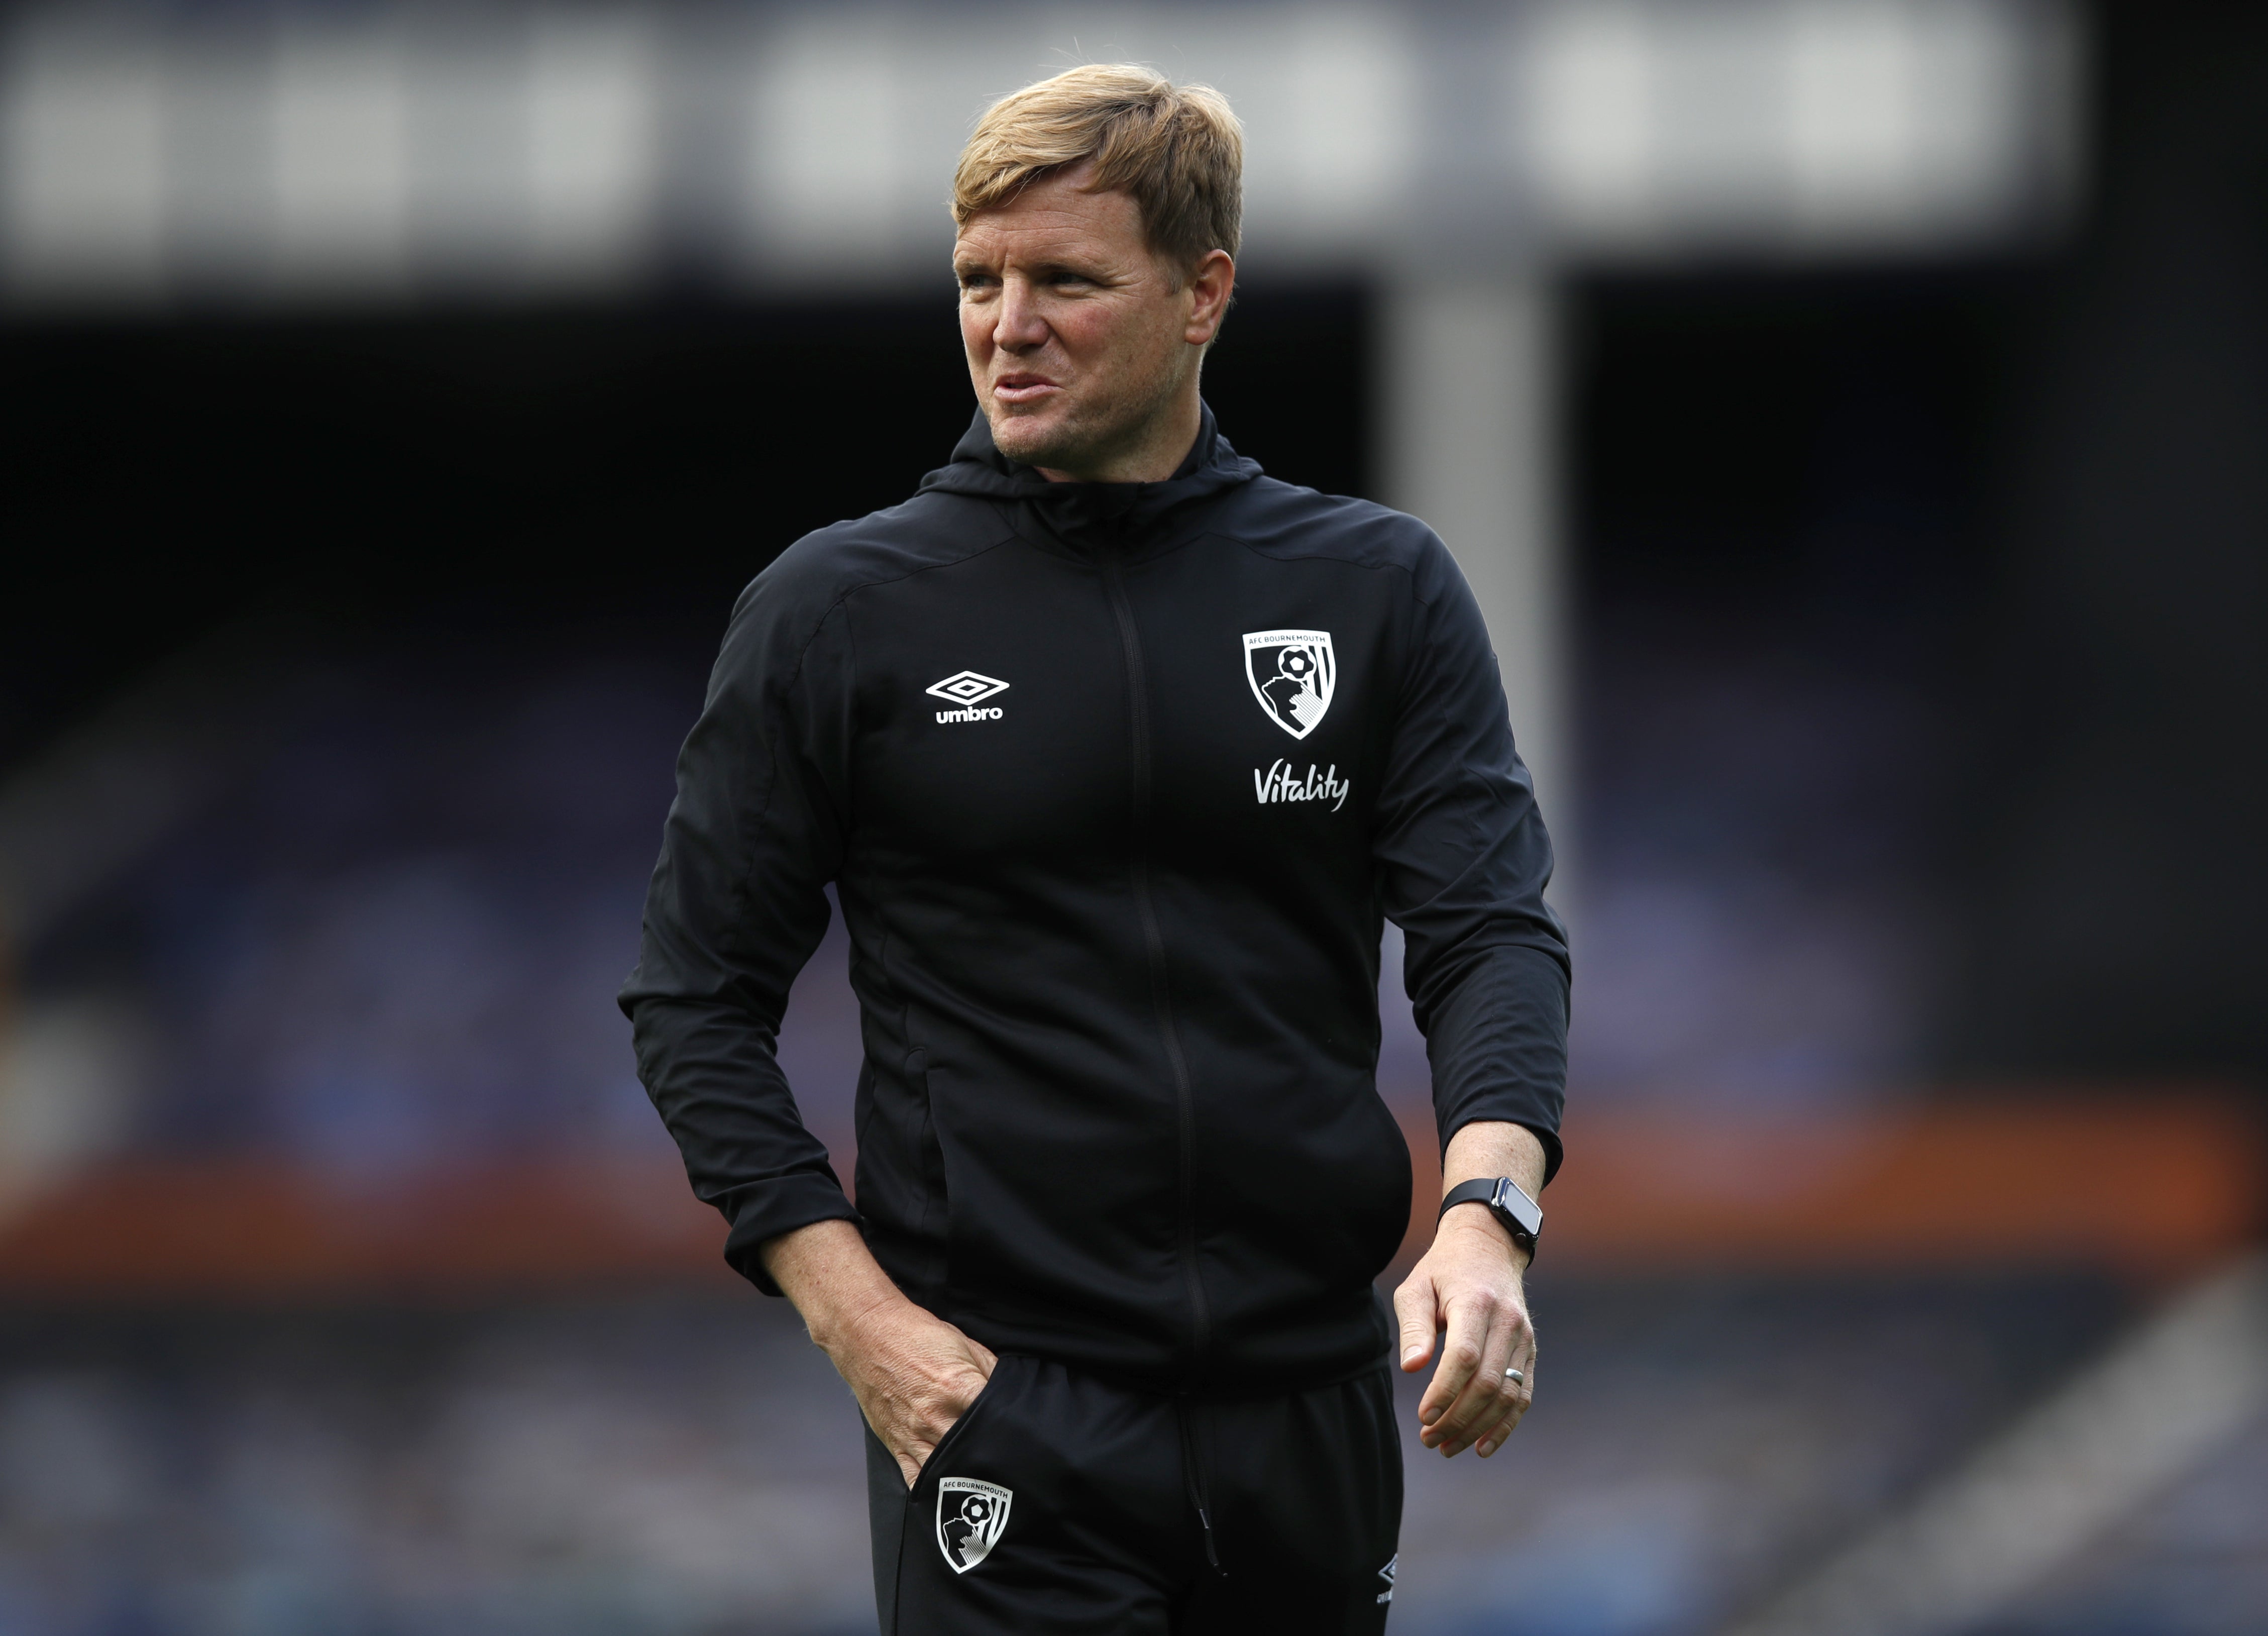 Managerial candidate Eddie Howe has been out of work since leaving Bournemouth